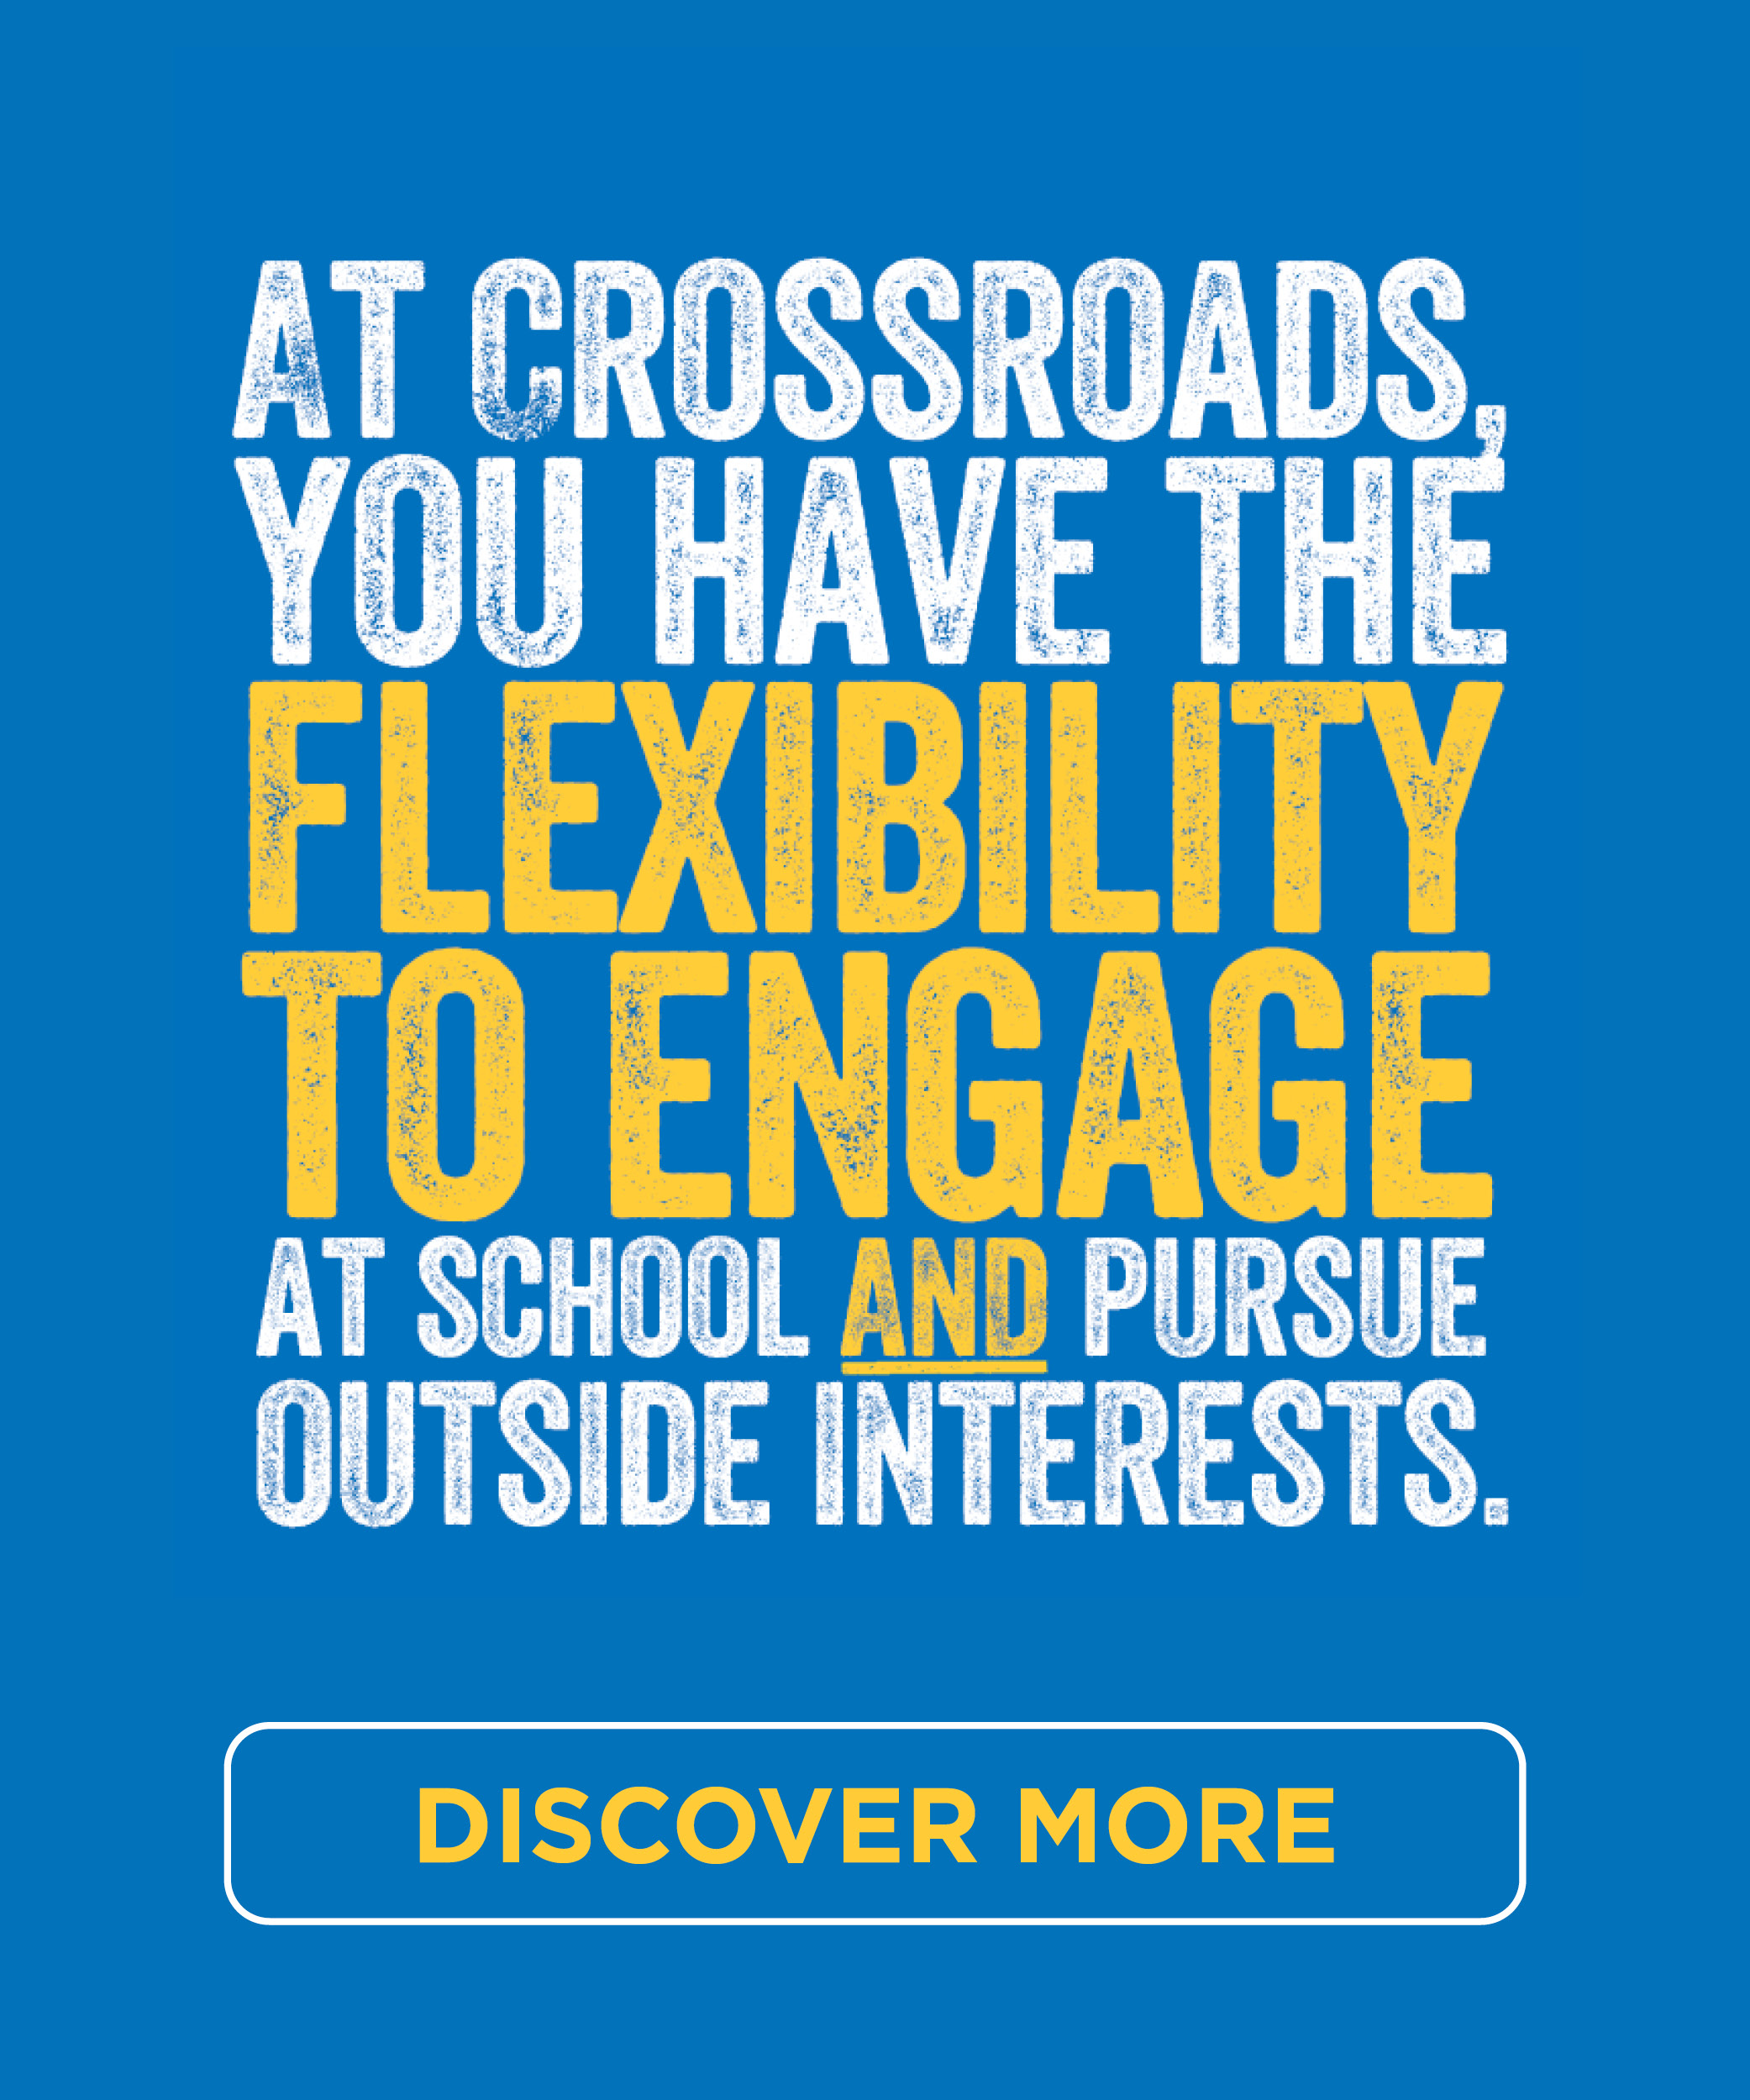 At Crossroads you have the flexibility to engage at school and purse outside interests.